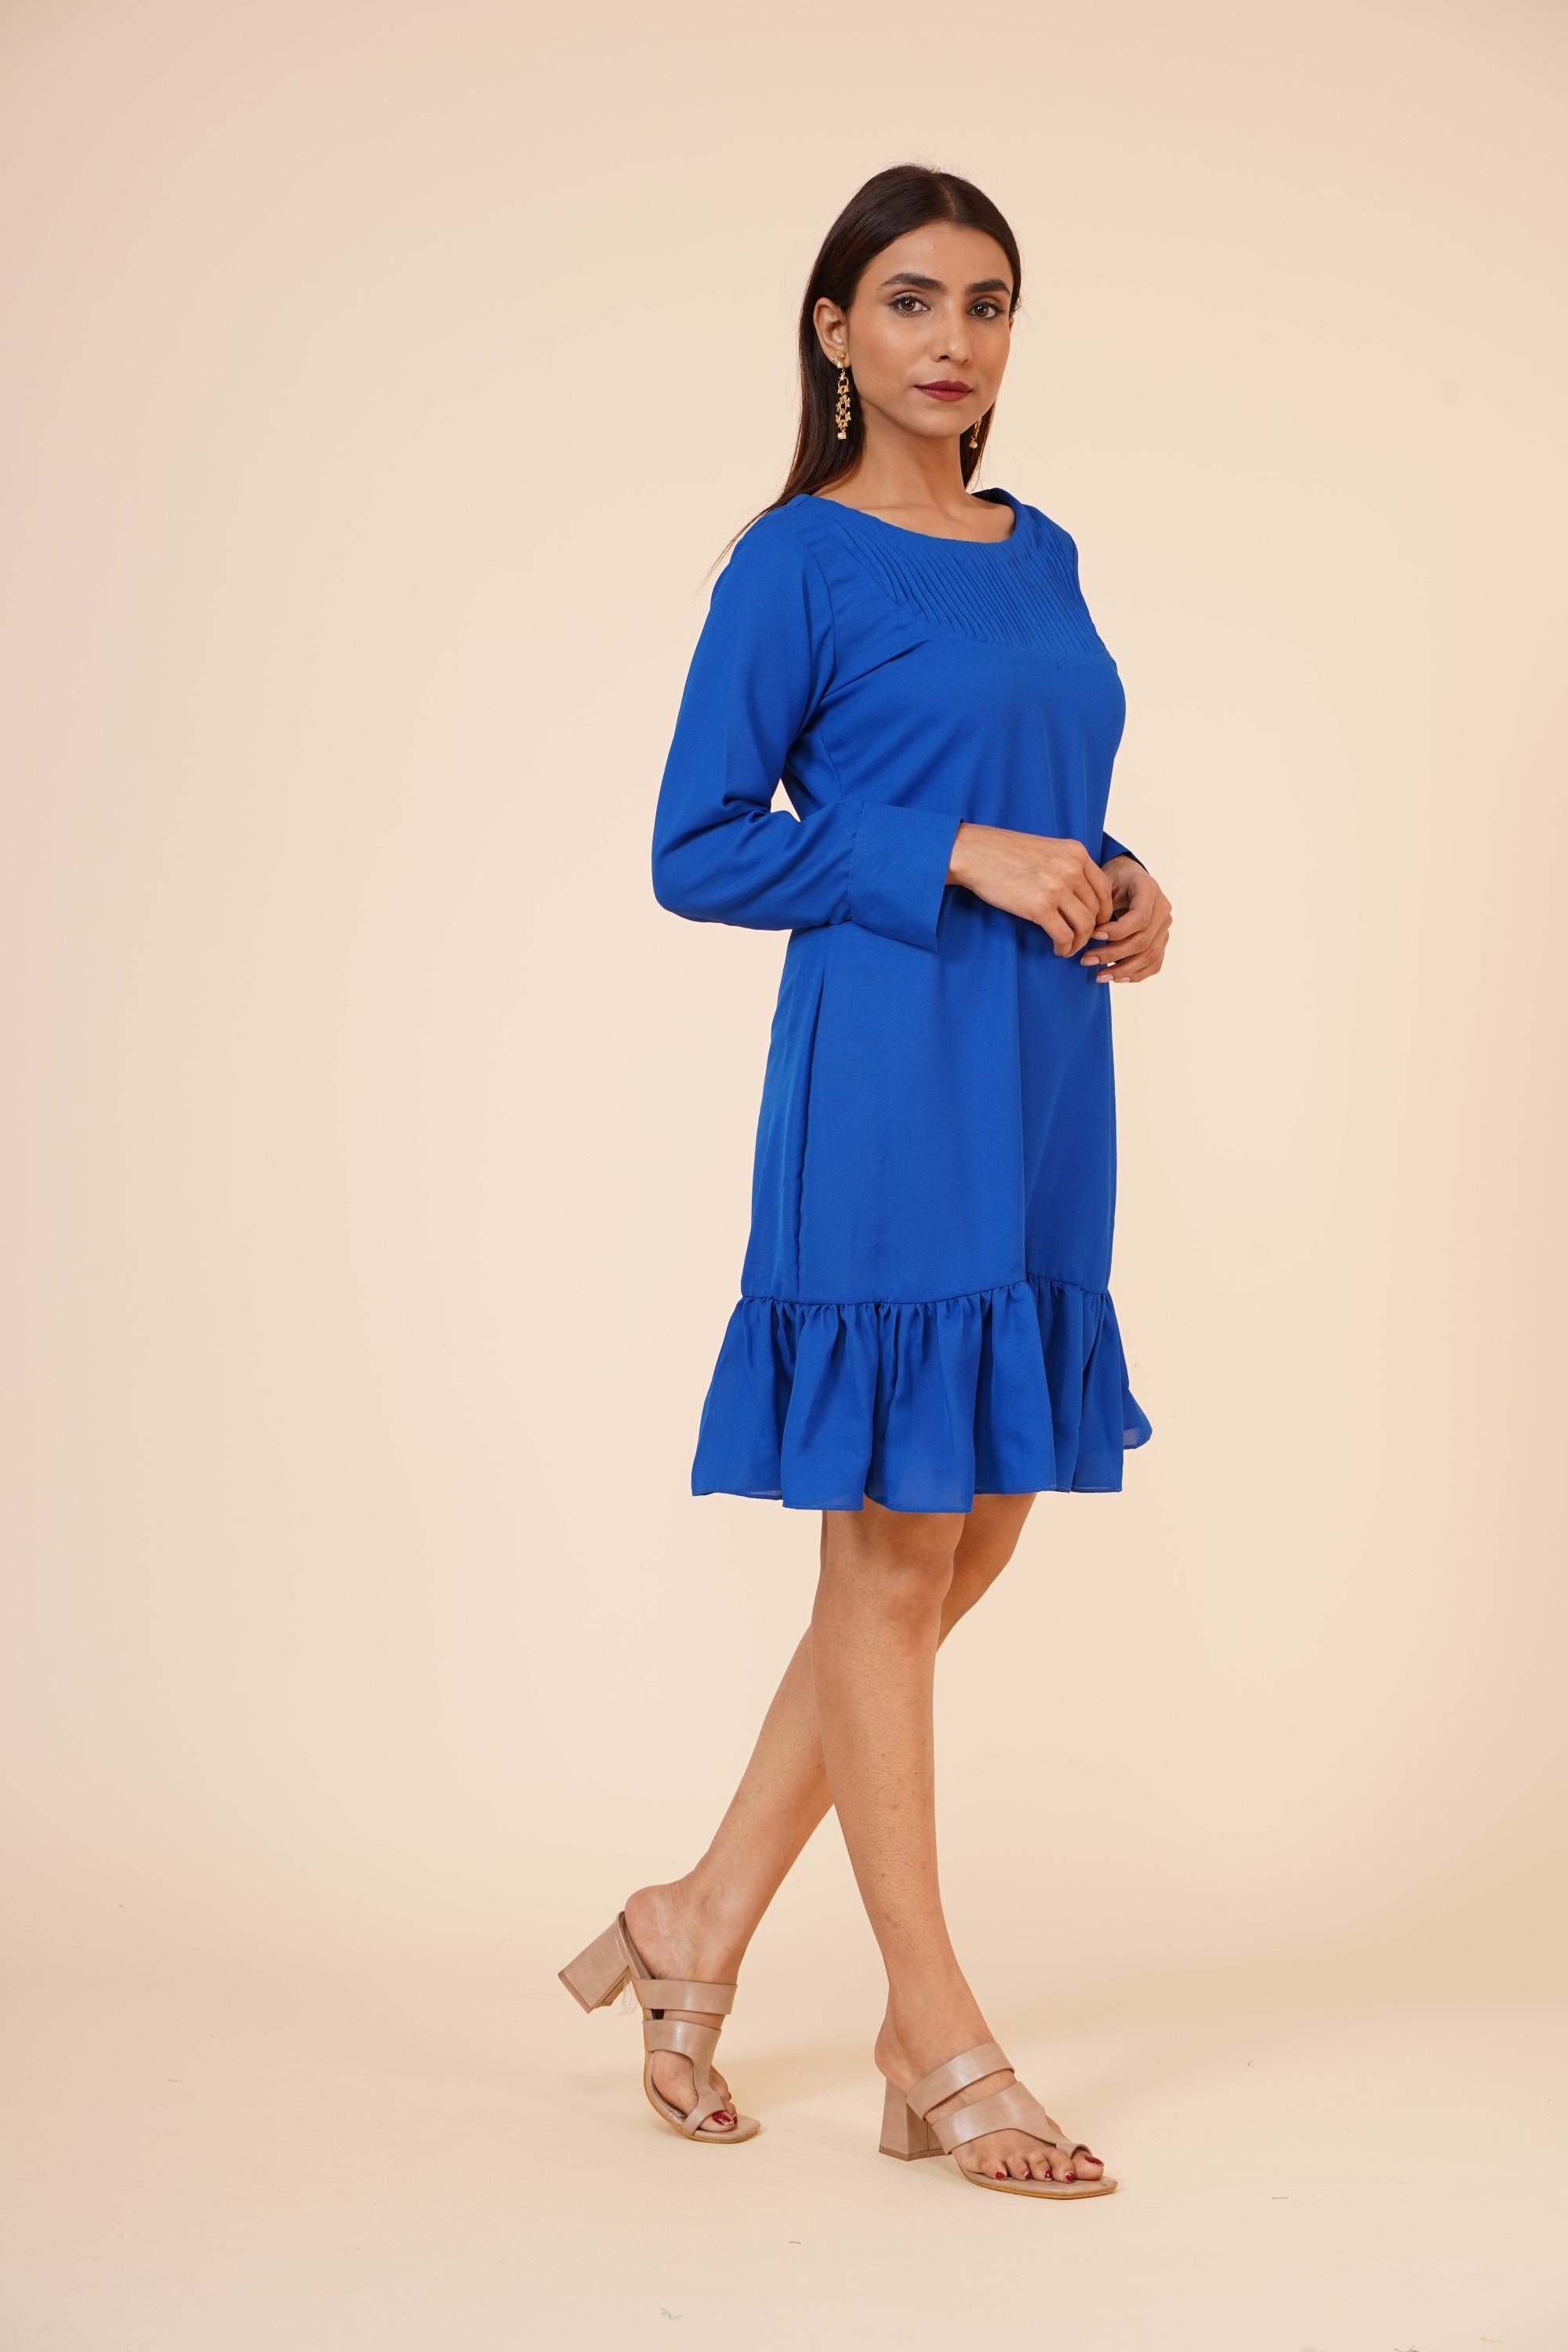 Women's Pin Tucks Georgette Midi Casual Dress Cobalt Blue - MIRACOLOS by Ruchi